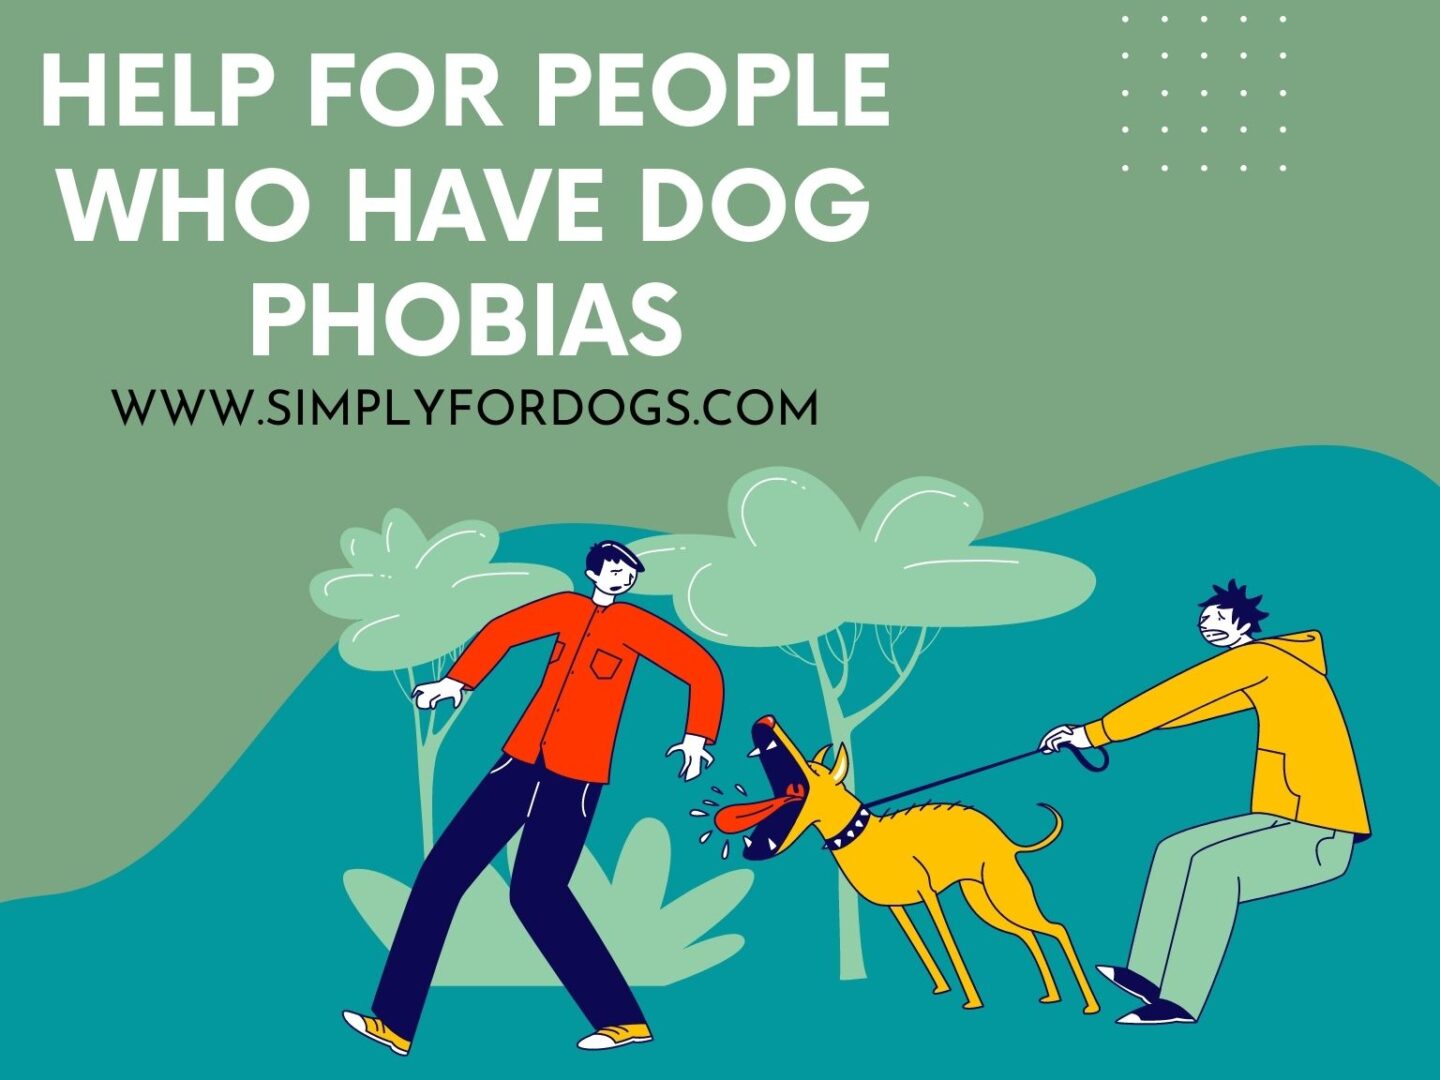 Help for People Who Have Dog Phobias